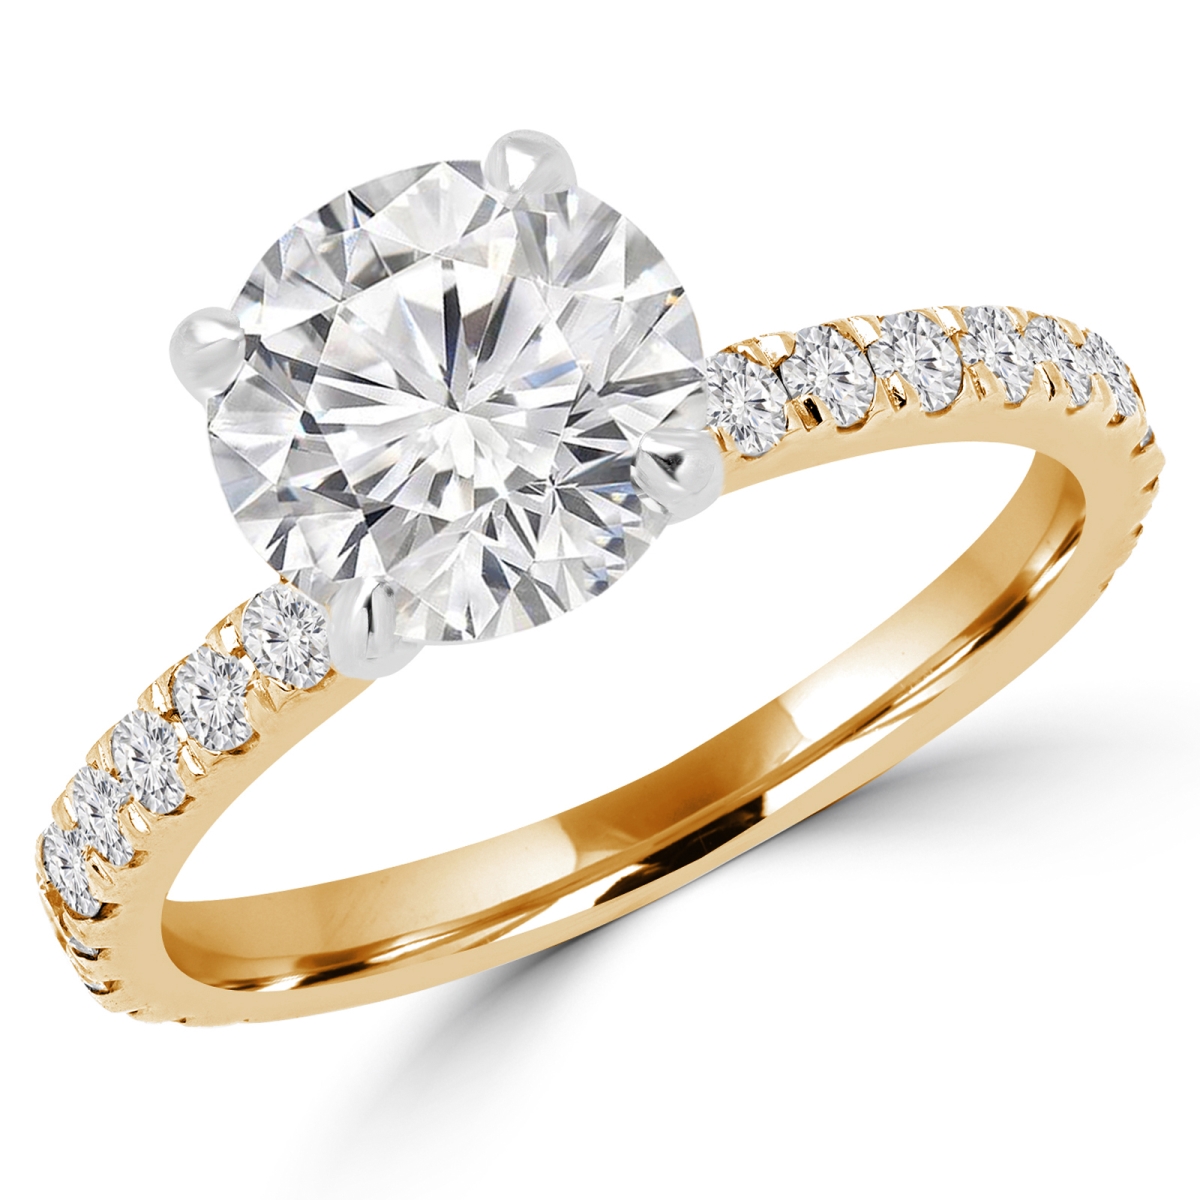 Picture of Majesty Diamonds MD160340-6.5 1 CTW Round Cut Diamond Multi Stone Engagement Ring in 14K Yellow Gold - Size 6.5